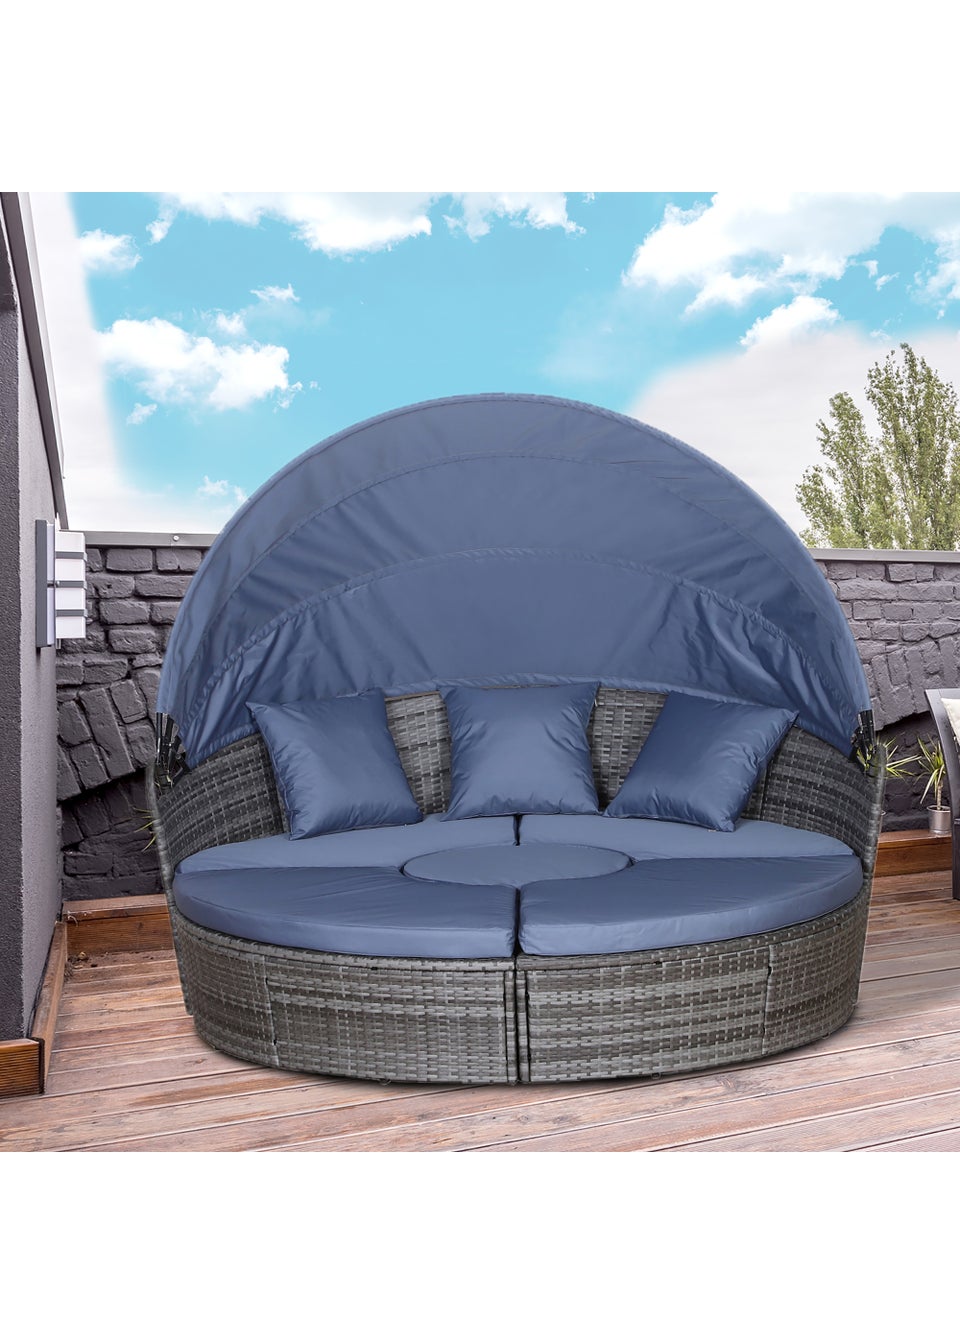 Outsunny 4 Piece Cushioned Outdoor Rattan Round Sofa Bed Set